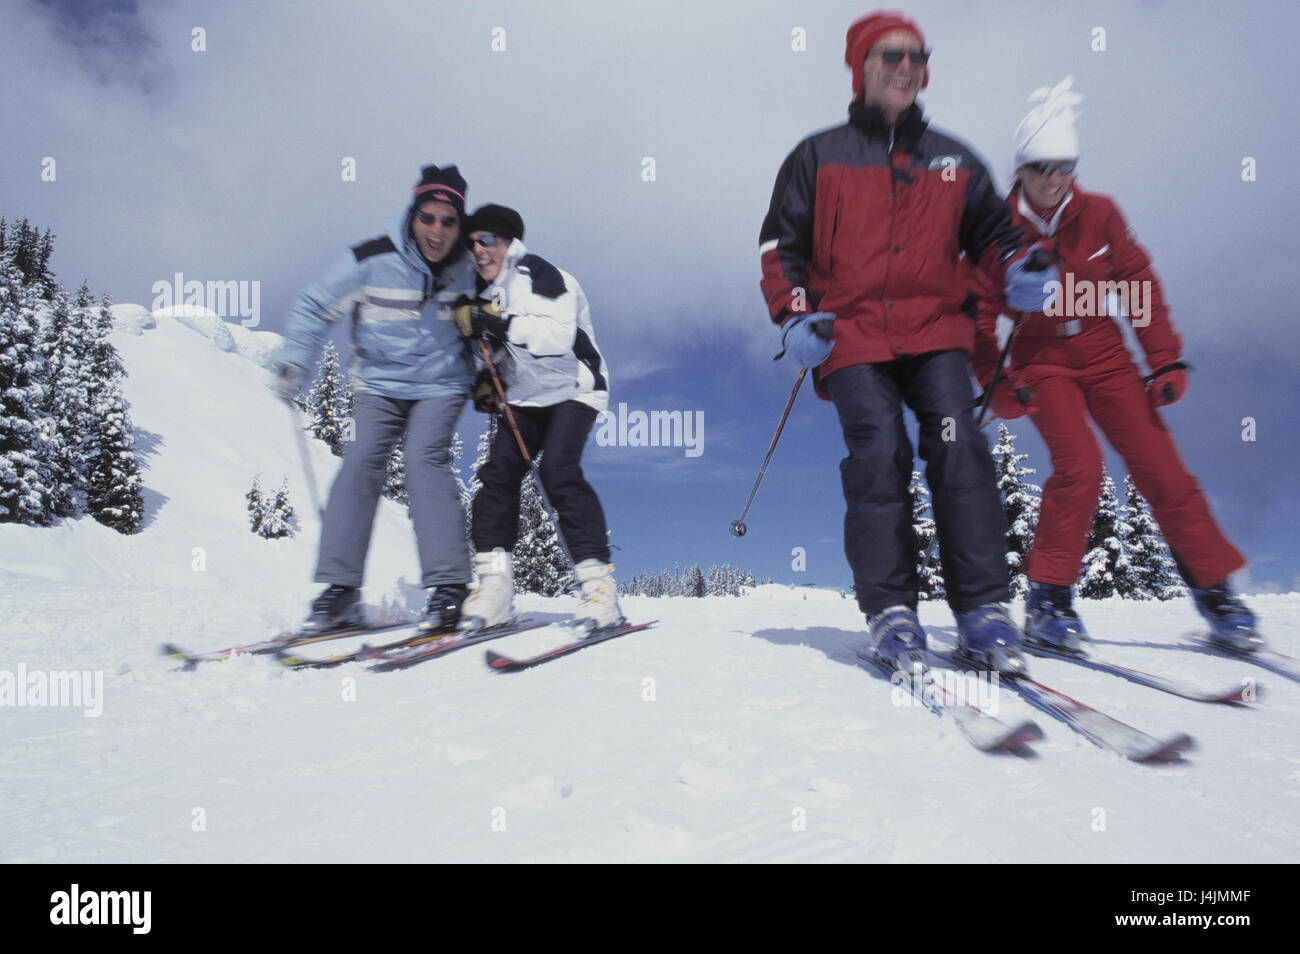 Winter, couples, skiing, melted snow, vacation, winter vacation, ski vacation, runway, skier, skier, skiing, men, women, four, motion, blur, winter sports Stock Photo